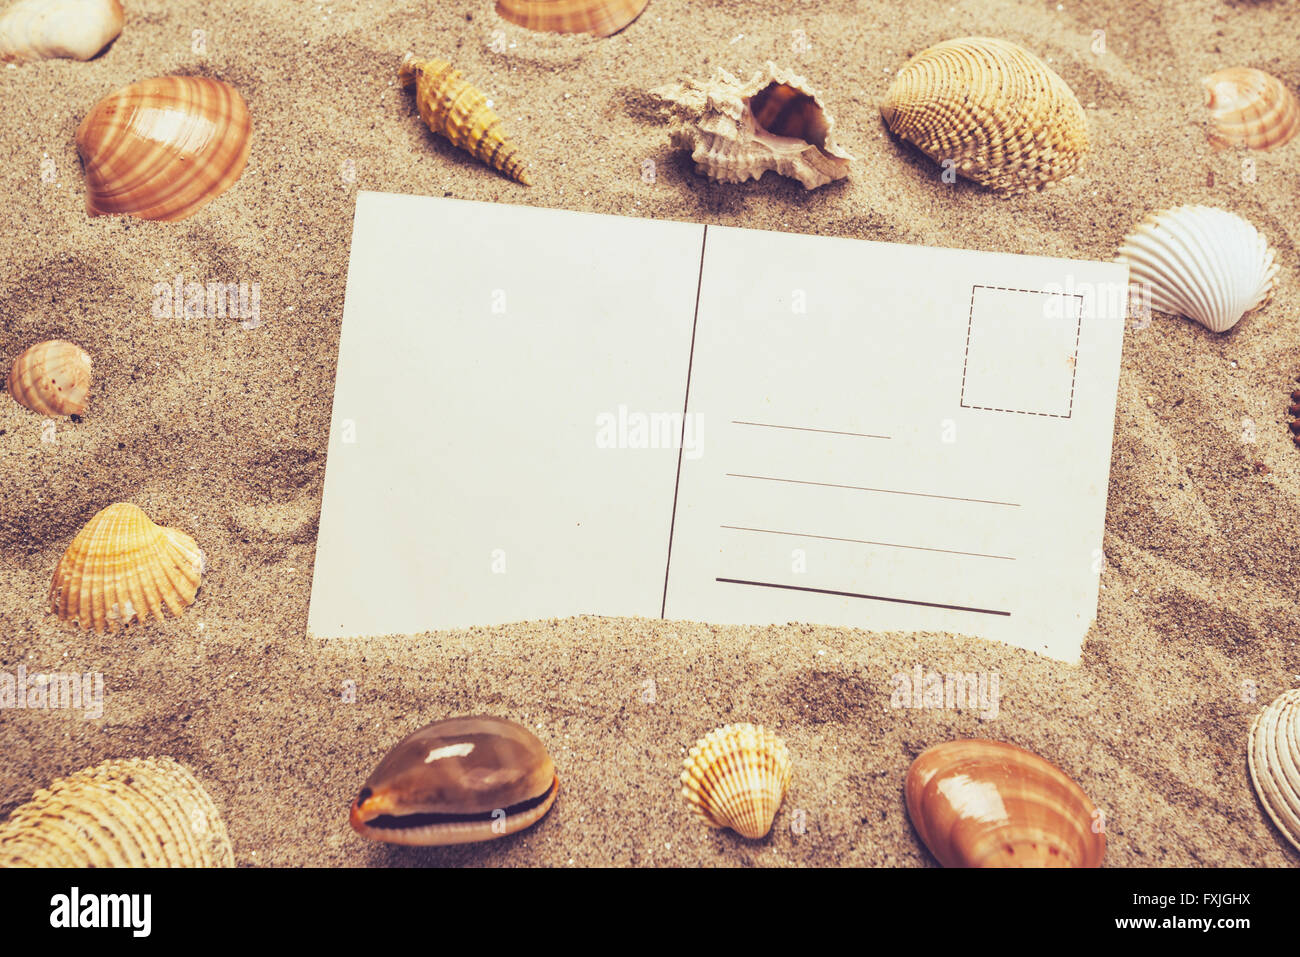 Blank postcard in hot beach sand with some sea shells, copy space for summer holiday vacation message. Stock Photo